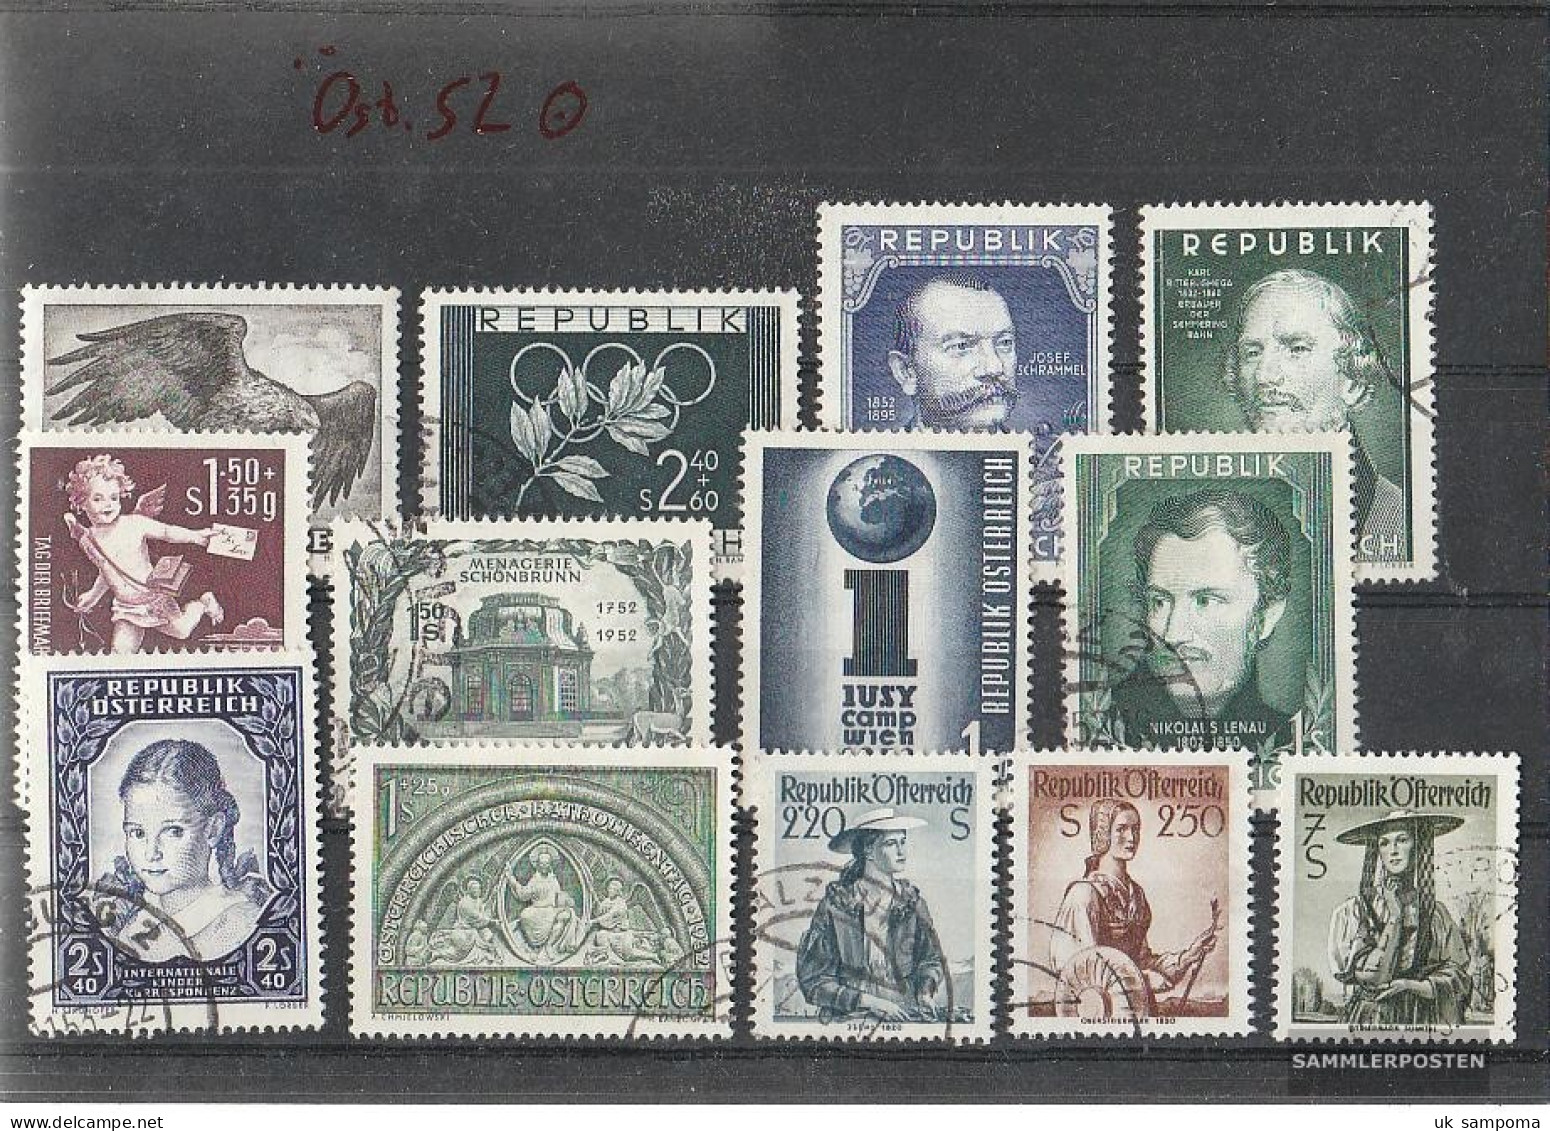 Austria 1952 Fine Used / Cancelled Complete Volume In Clean Conservation - Años Completos